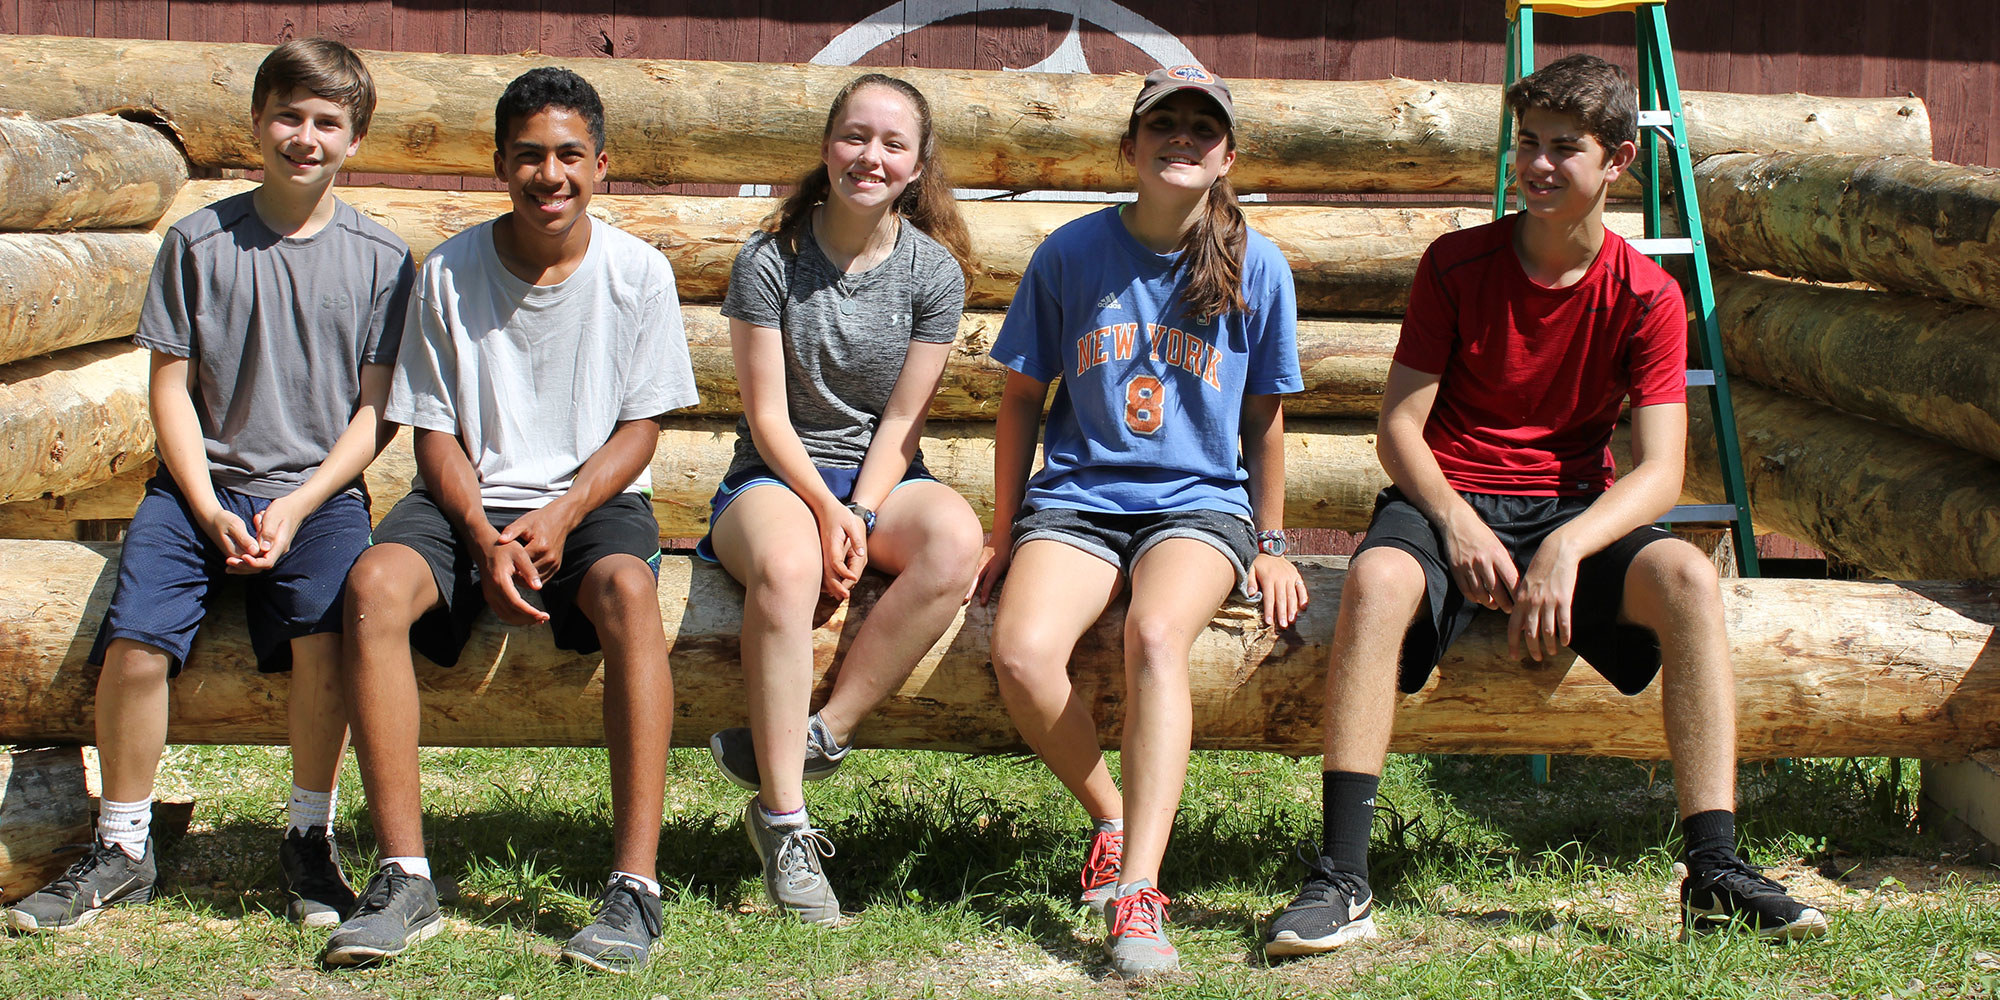 Adirondack NY Sleepaway Summer Camps for Boys & Girls North Country Camps